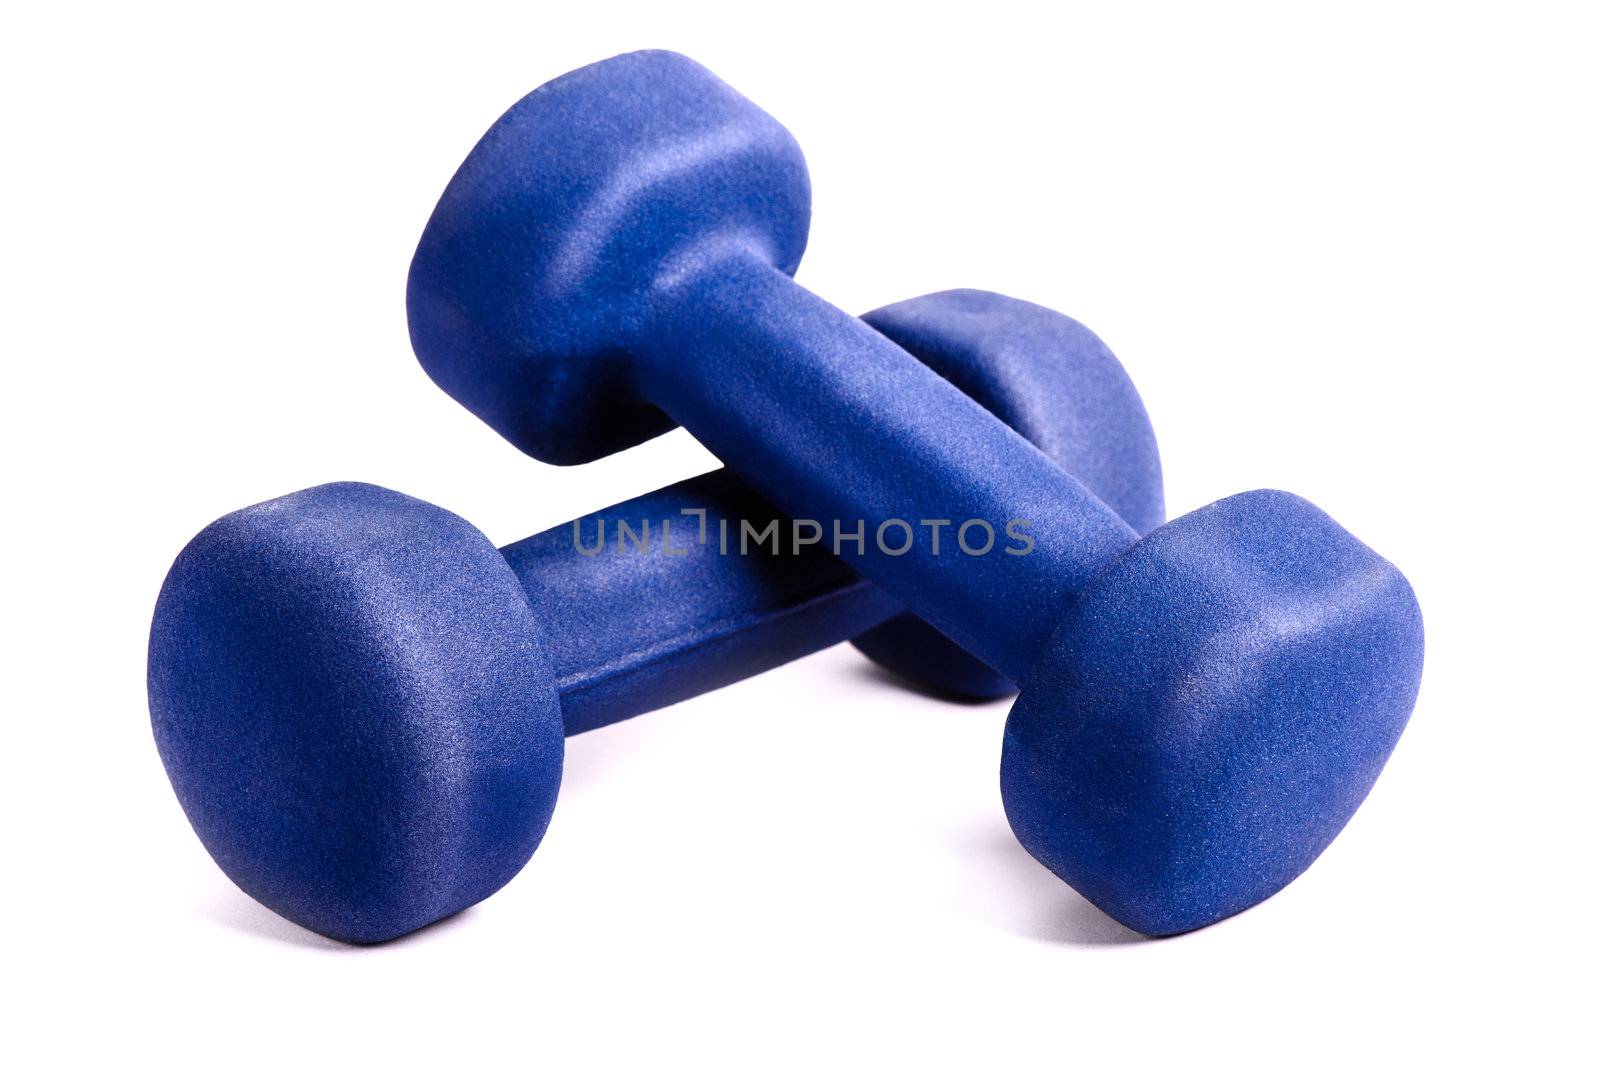 Two blue dumbbells isolated on a white background